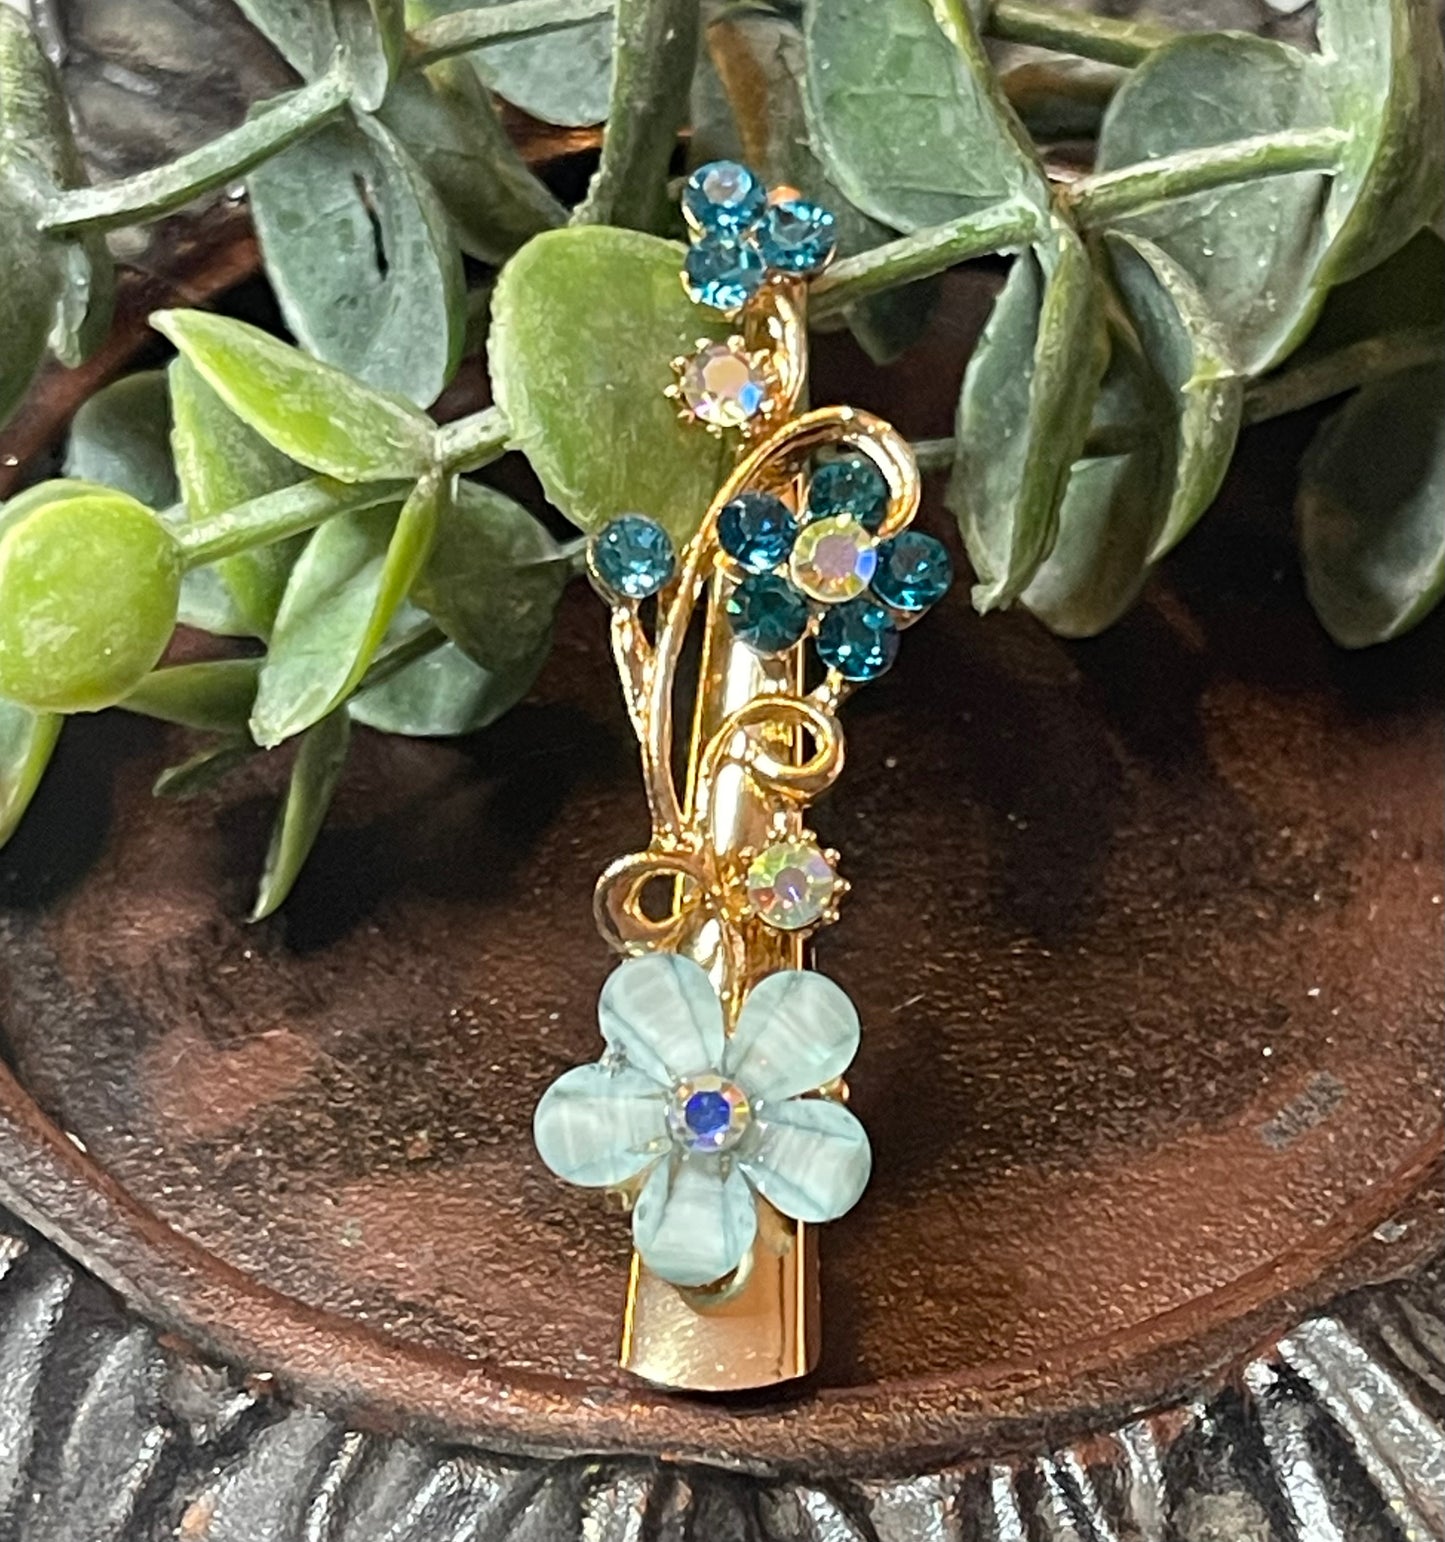 Teal blue Crystal rhinestone flowers alligator salon clip approximately 2.5” gold tone formal hair accessories gift wedding bridesmaid prom birthday mother of bride groom